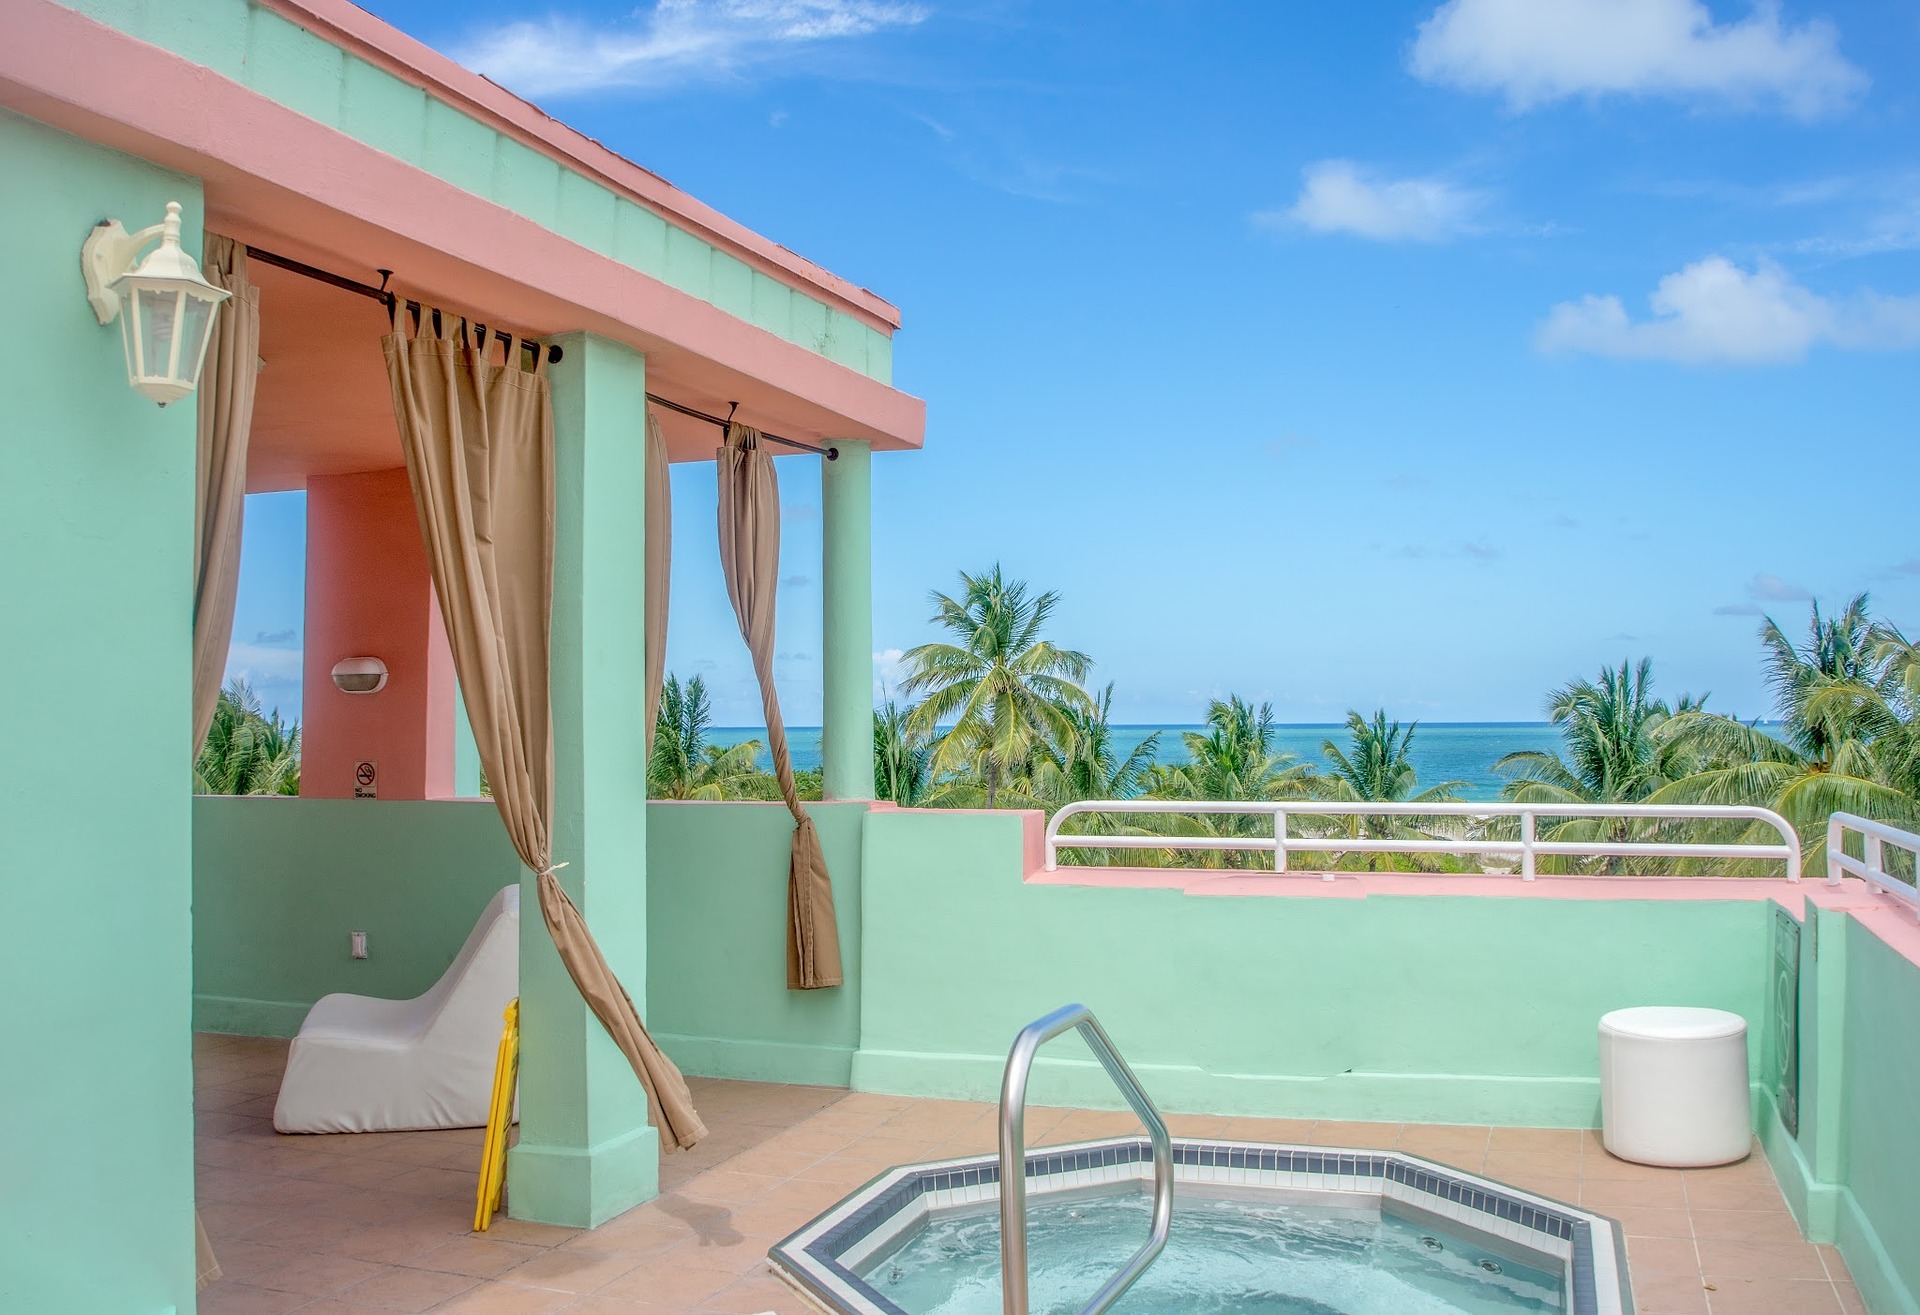 Discover the Best Boutique Hotels in South Florida